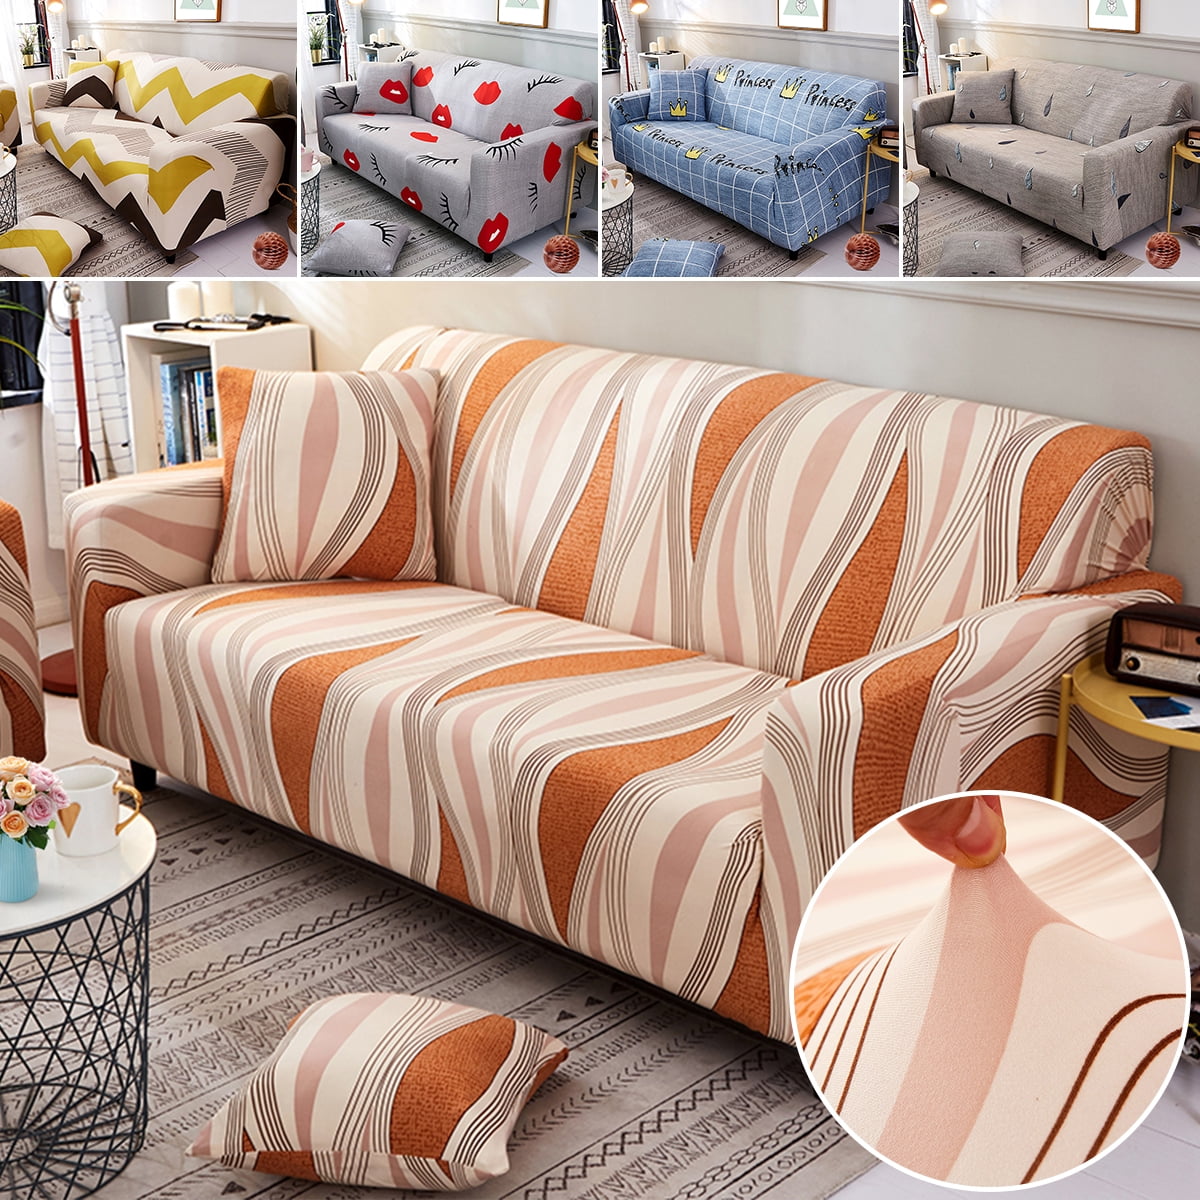 Details about   1/2/3/4 Seater Geometry Printed Home Slipcovers Couch Stretch Covers Sofa Lots # 